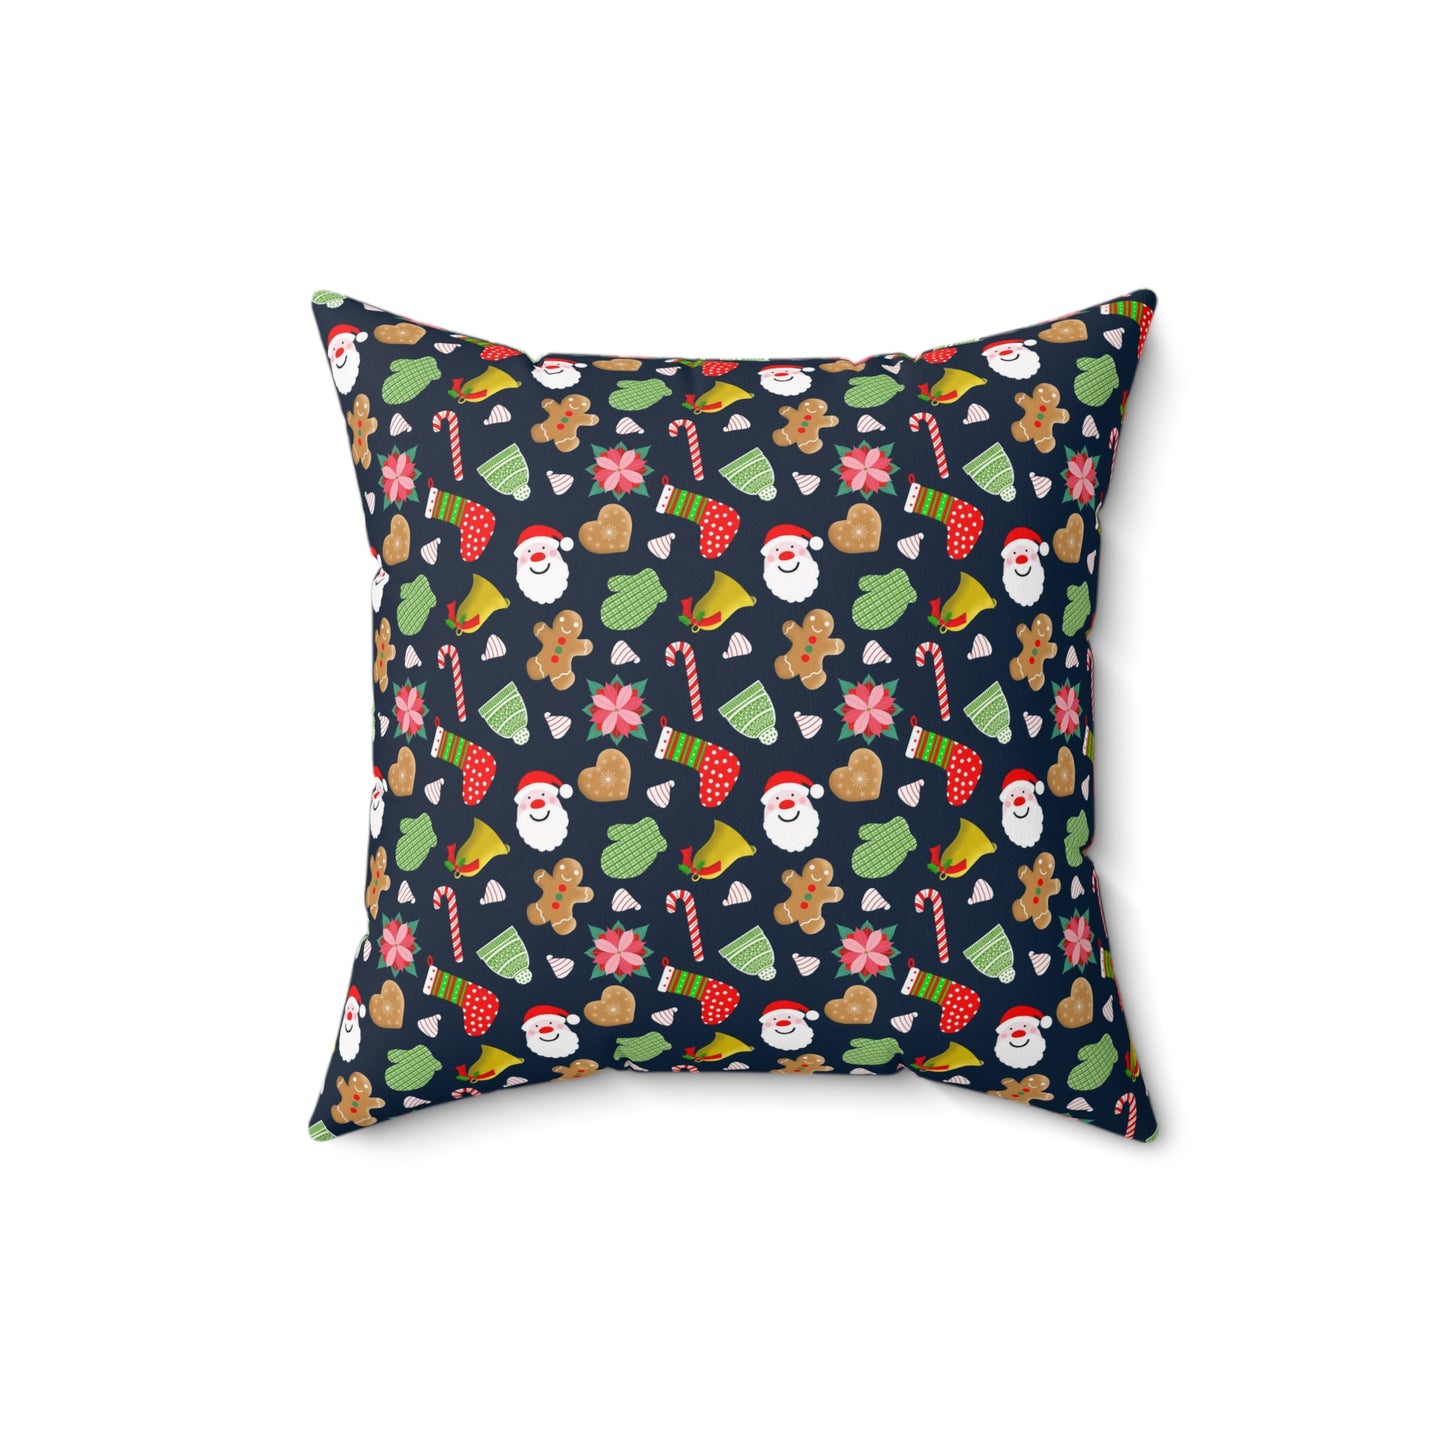 Merry & Bright Spun Polyester Square Pillow